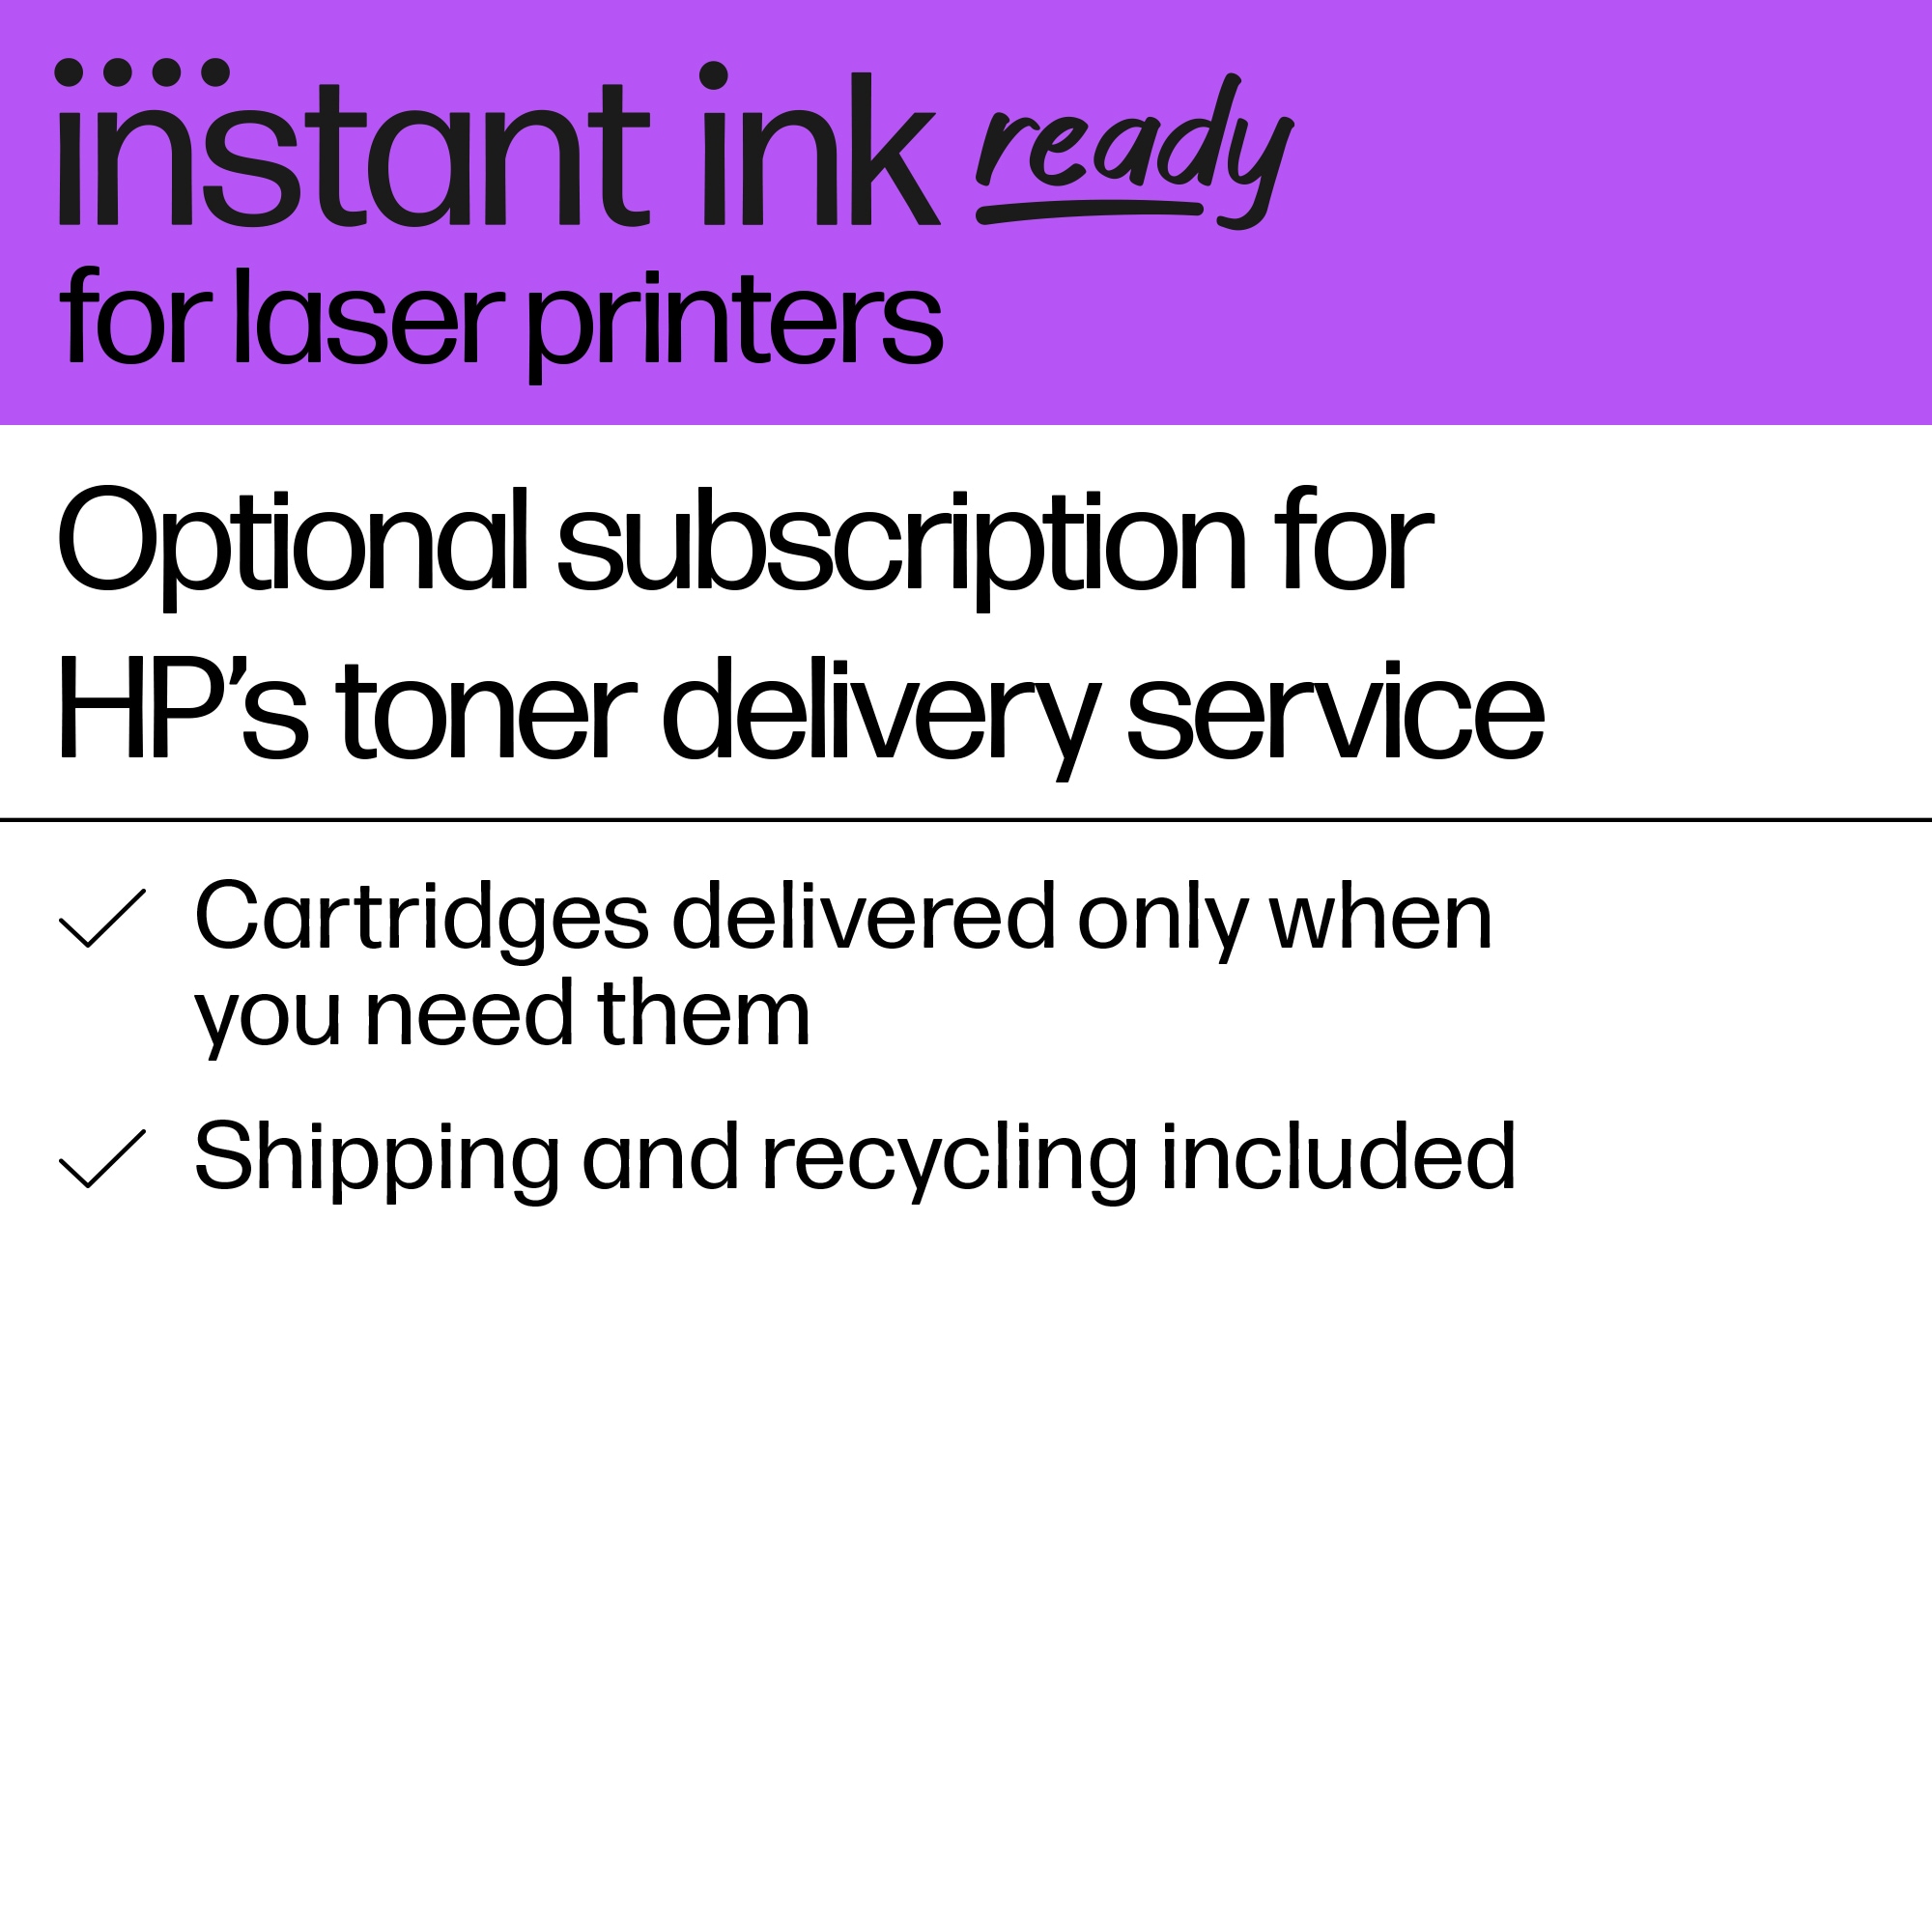 2 LaserJet M234sdw Ink Printer available with months Instant MFP HP